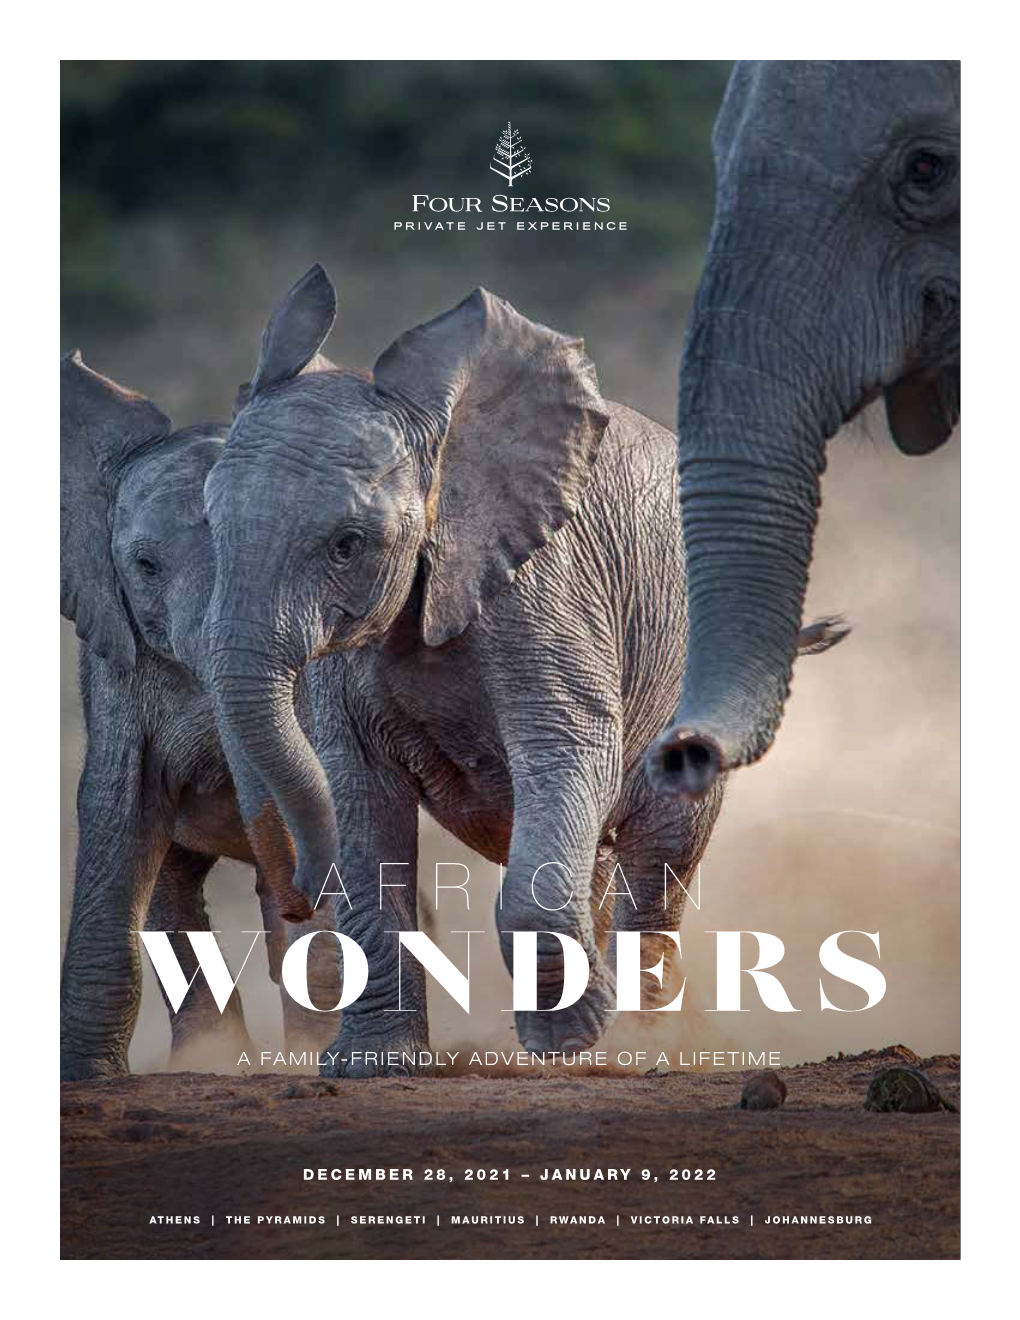 African Wonders a Family-Friendly Adventure of a Lifetime